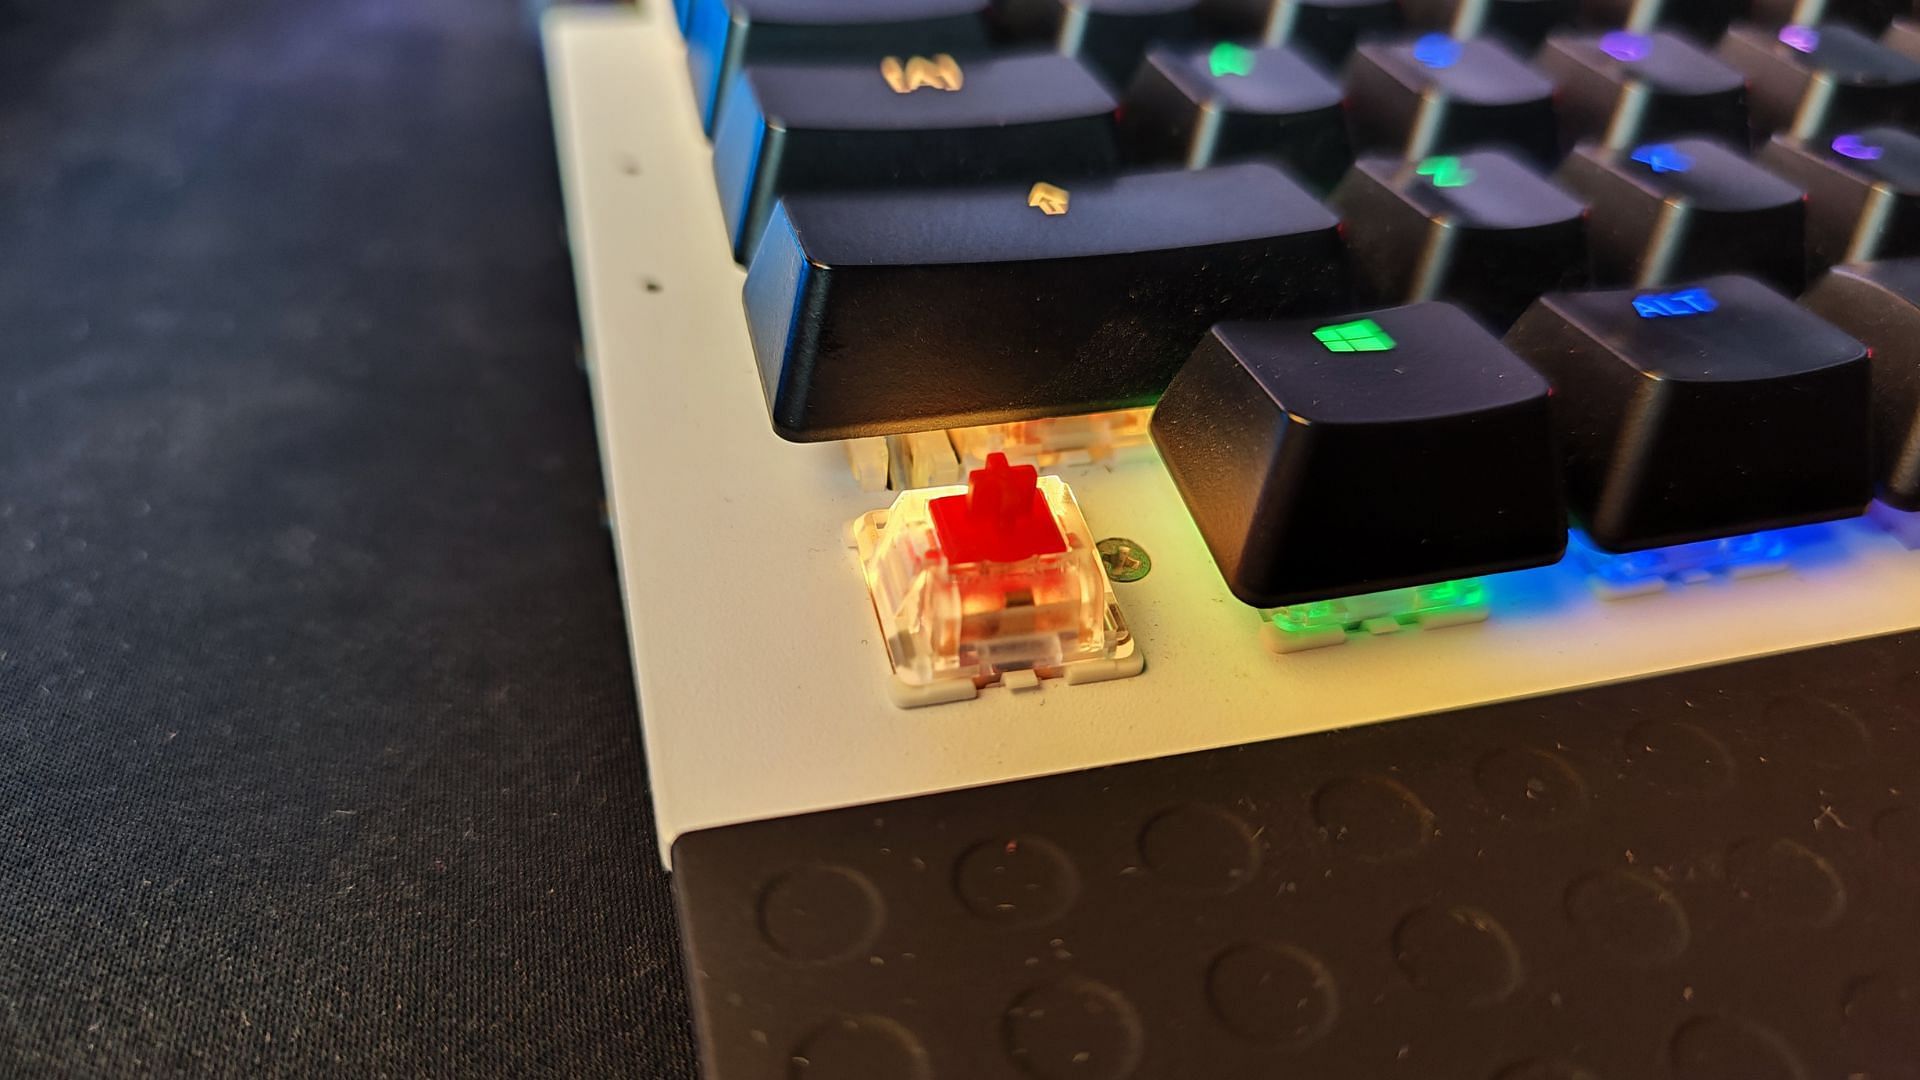 The Gateron Red switch as installed in the Function keyboard (Image via Sportskeeda)